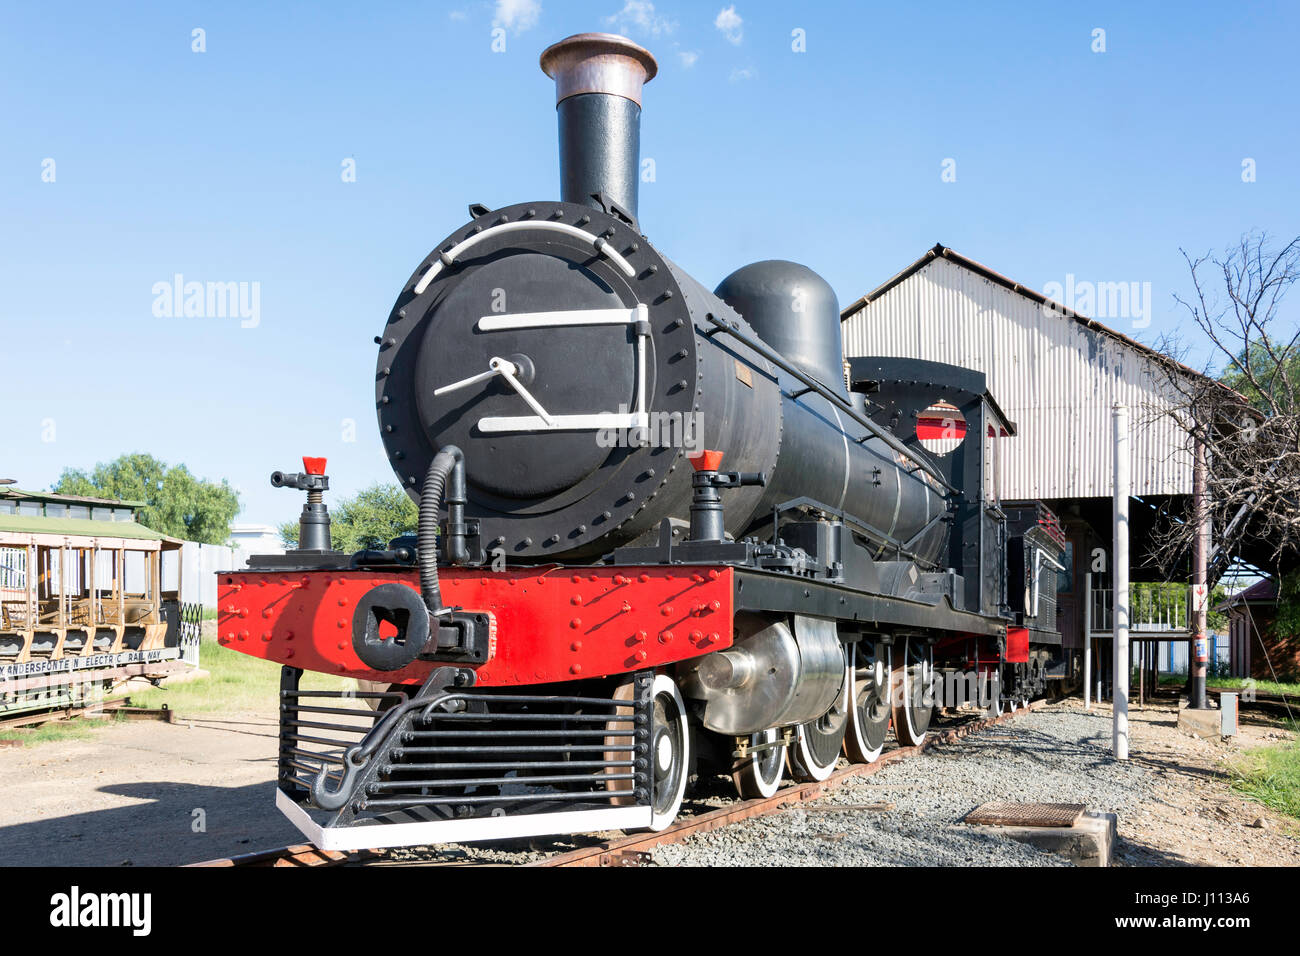 Vintage steam train in 'The Old Town' at The Big Hole, South Circular Road, Kimberley, Northern Cape Province, Republic of South Africa Stock Photo